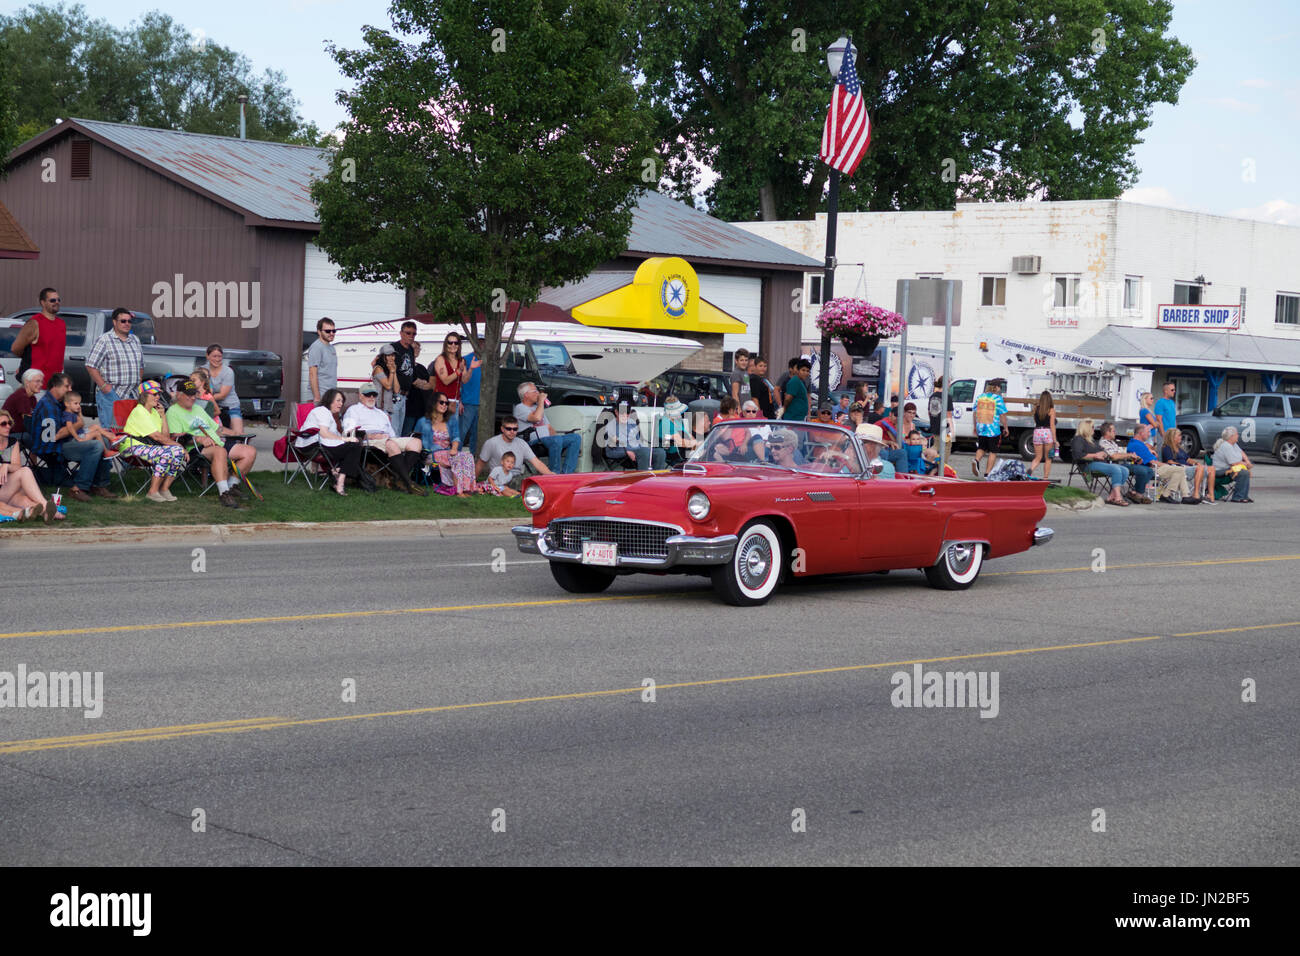 Restored 1957 Ford Thunderbird participates in the annual Cruz-In parade in Montague, Michigan. Stock Photo